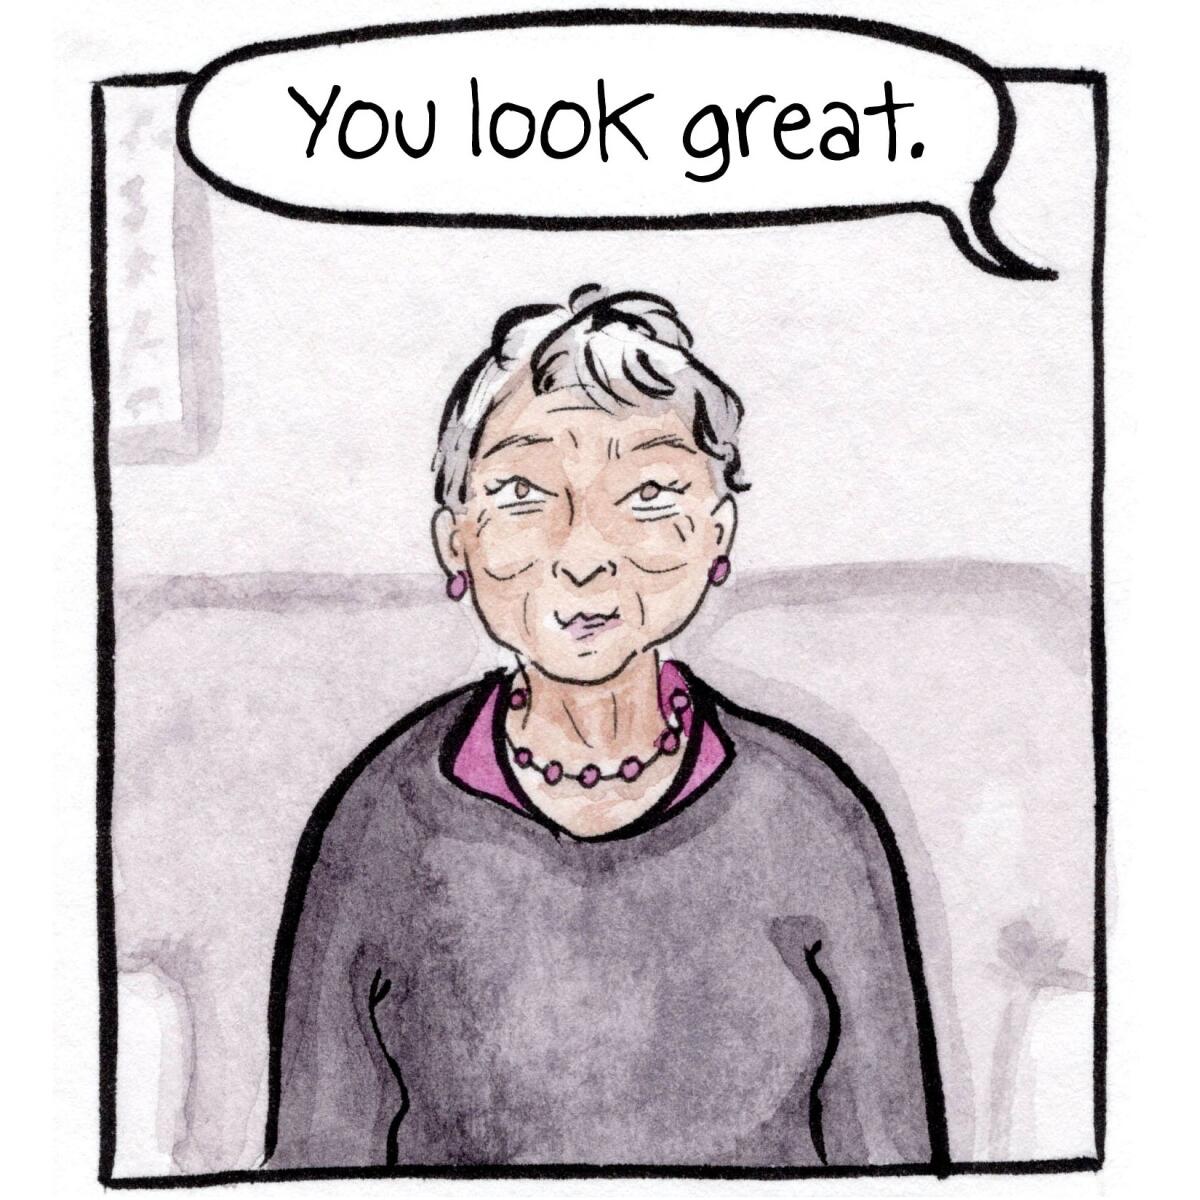 Someone says, "You look great," to an older woman with a sweater and short gray hair.